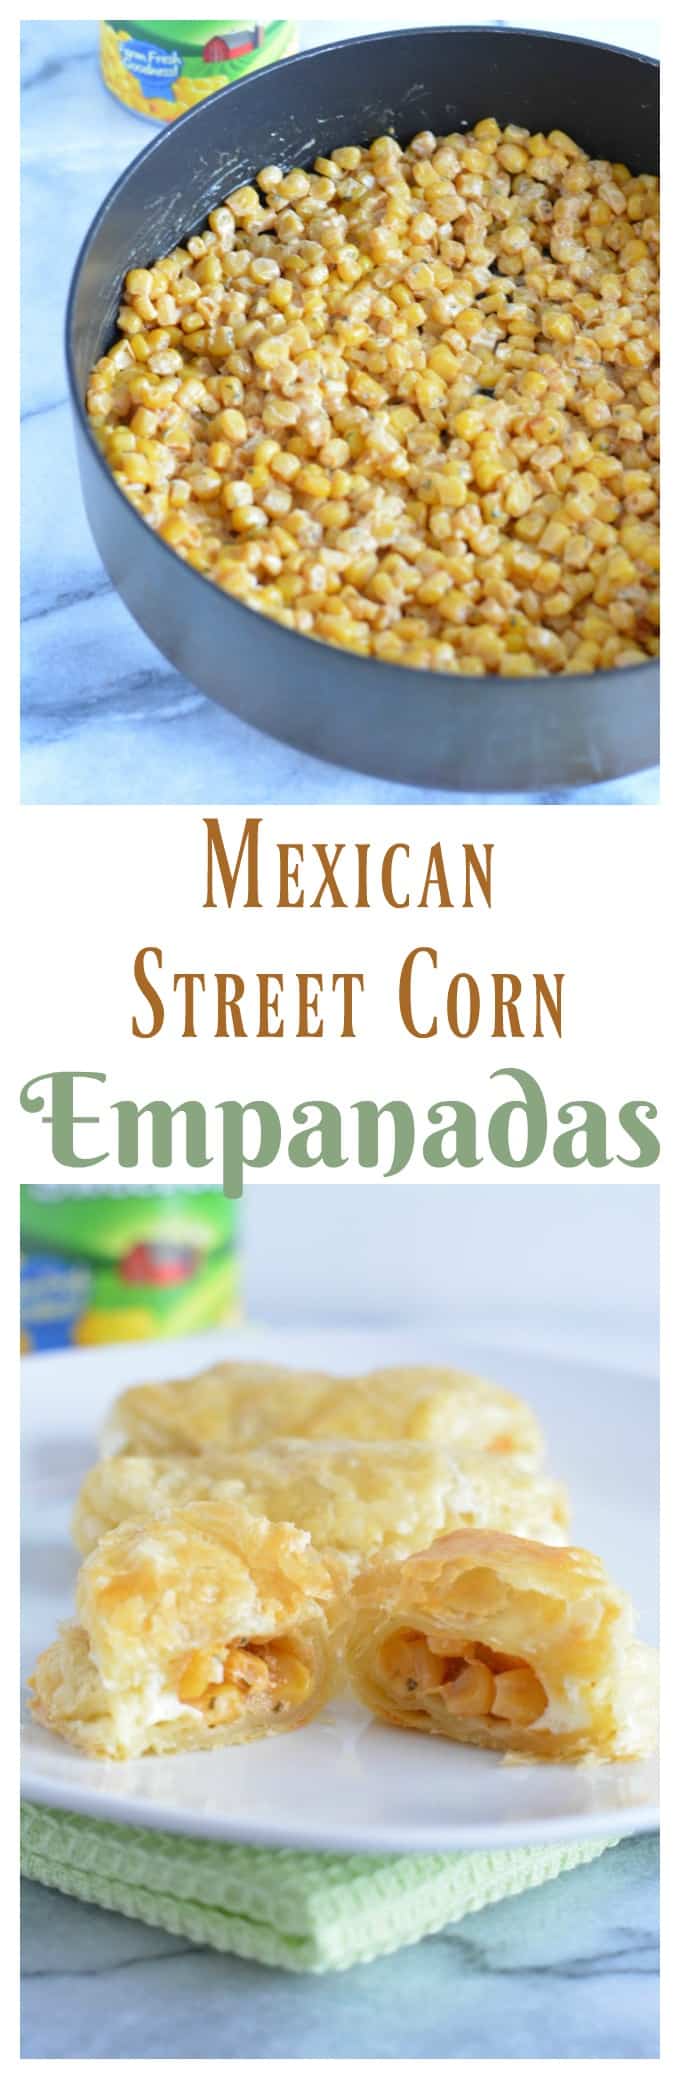 Mexican Street Corn Empanadas are a quick and easy appetizer or snack ready is 30 minutes.